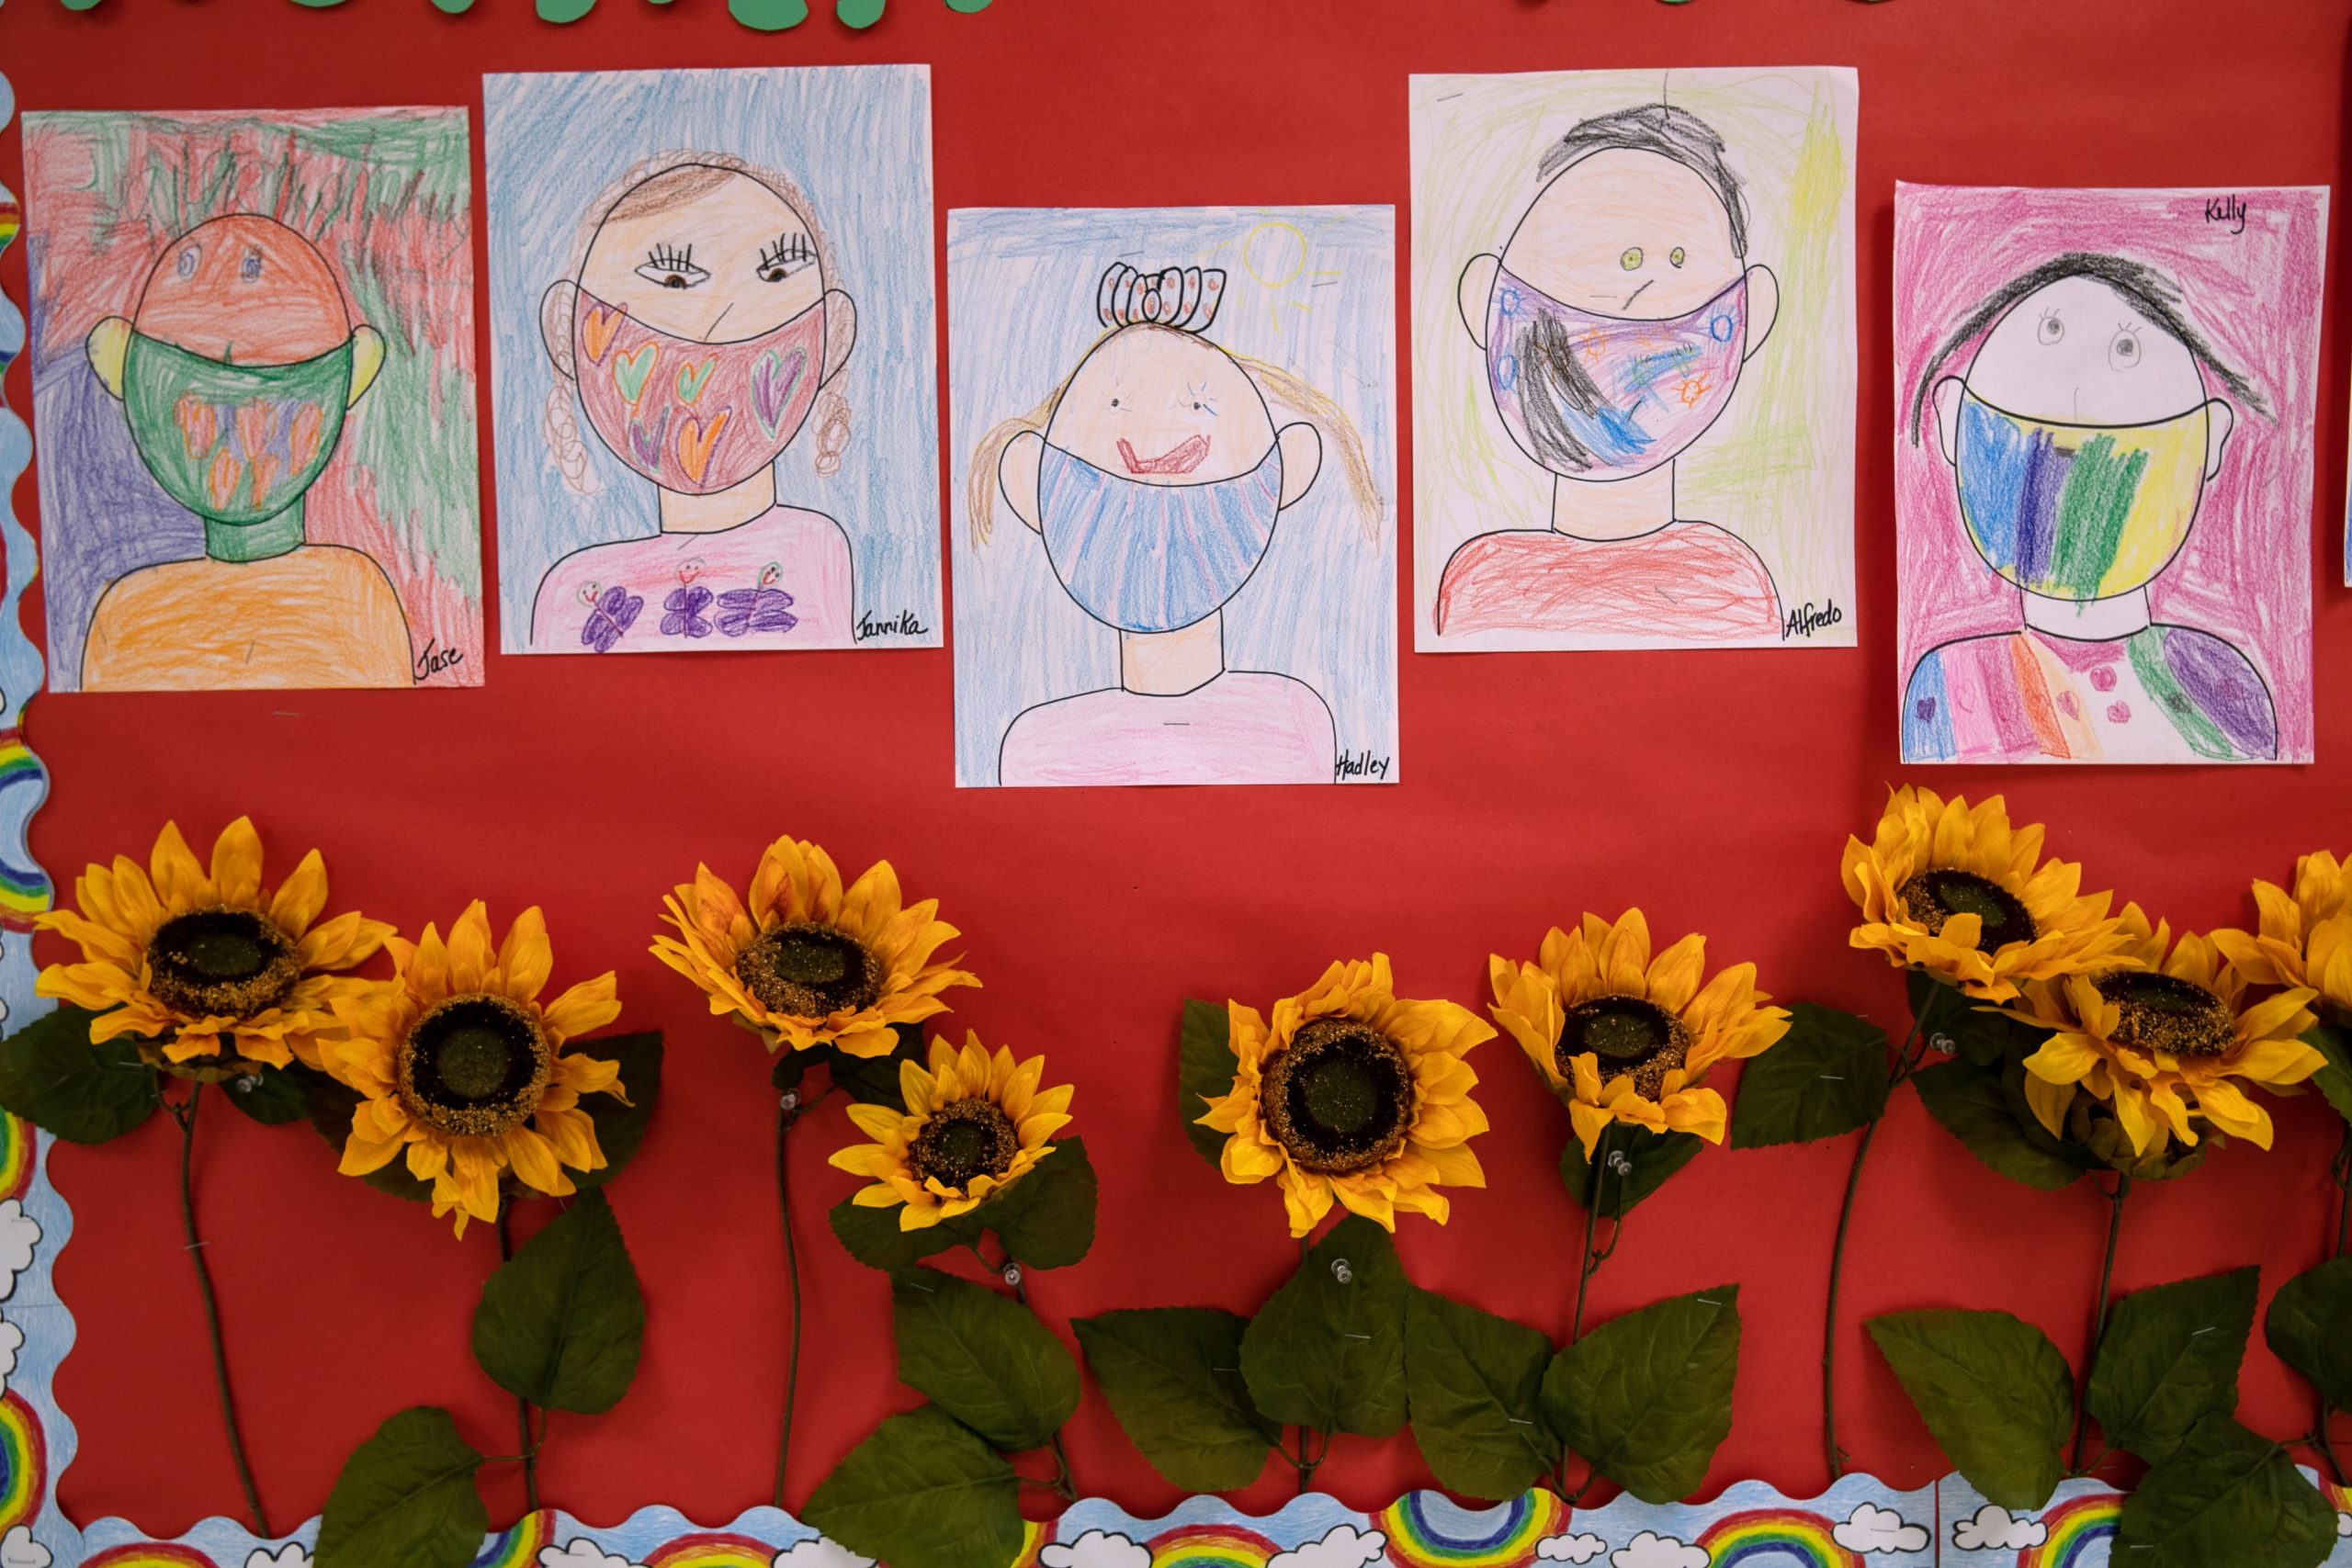 Drawings of children wearing masks adorn a hallway at Stark Elementary School on September 16, 2020 in Stamford, Connecticut. Most students at Stamford Public Schools are taking part in a hybrid education model, where they attend in-school classes every other day and distance learn the rest. About 20 percent of students in the school district, however, are enrolled in the distance learning option due to coronavirus concerns. (Photo by John Moore/Getty Images)